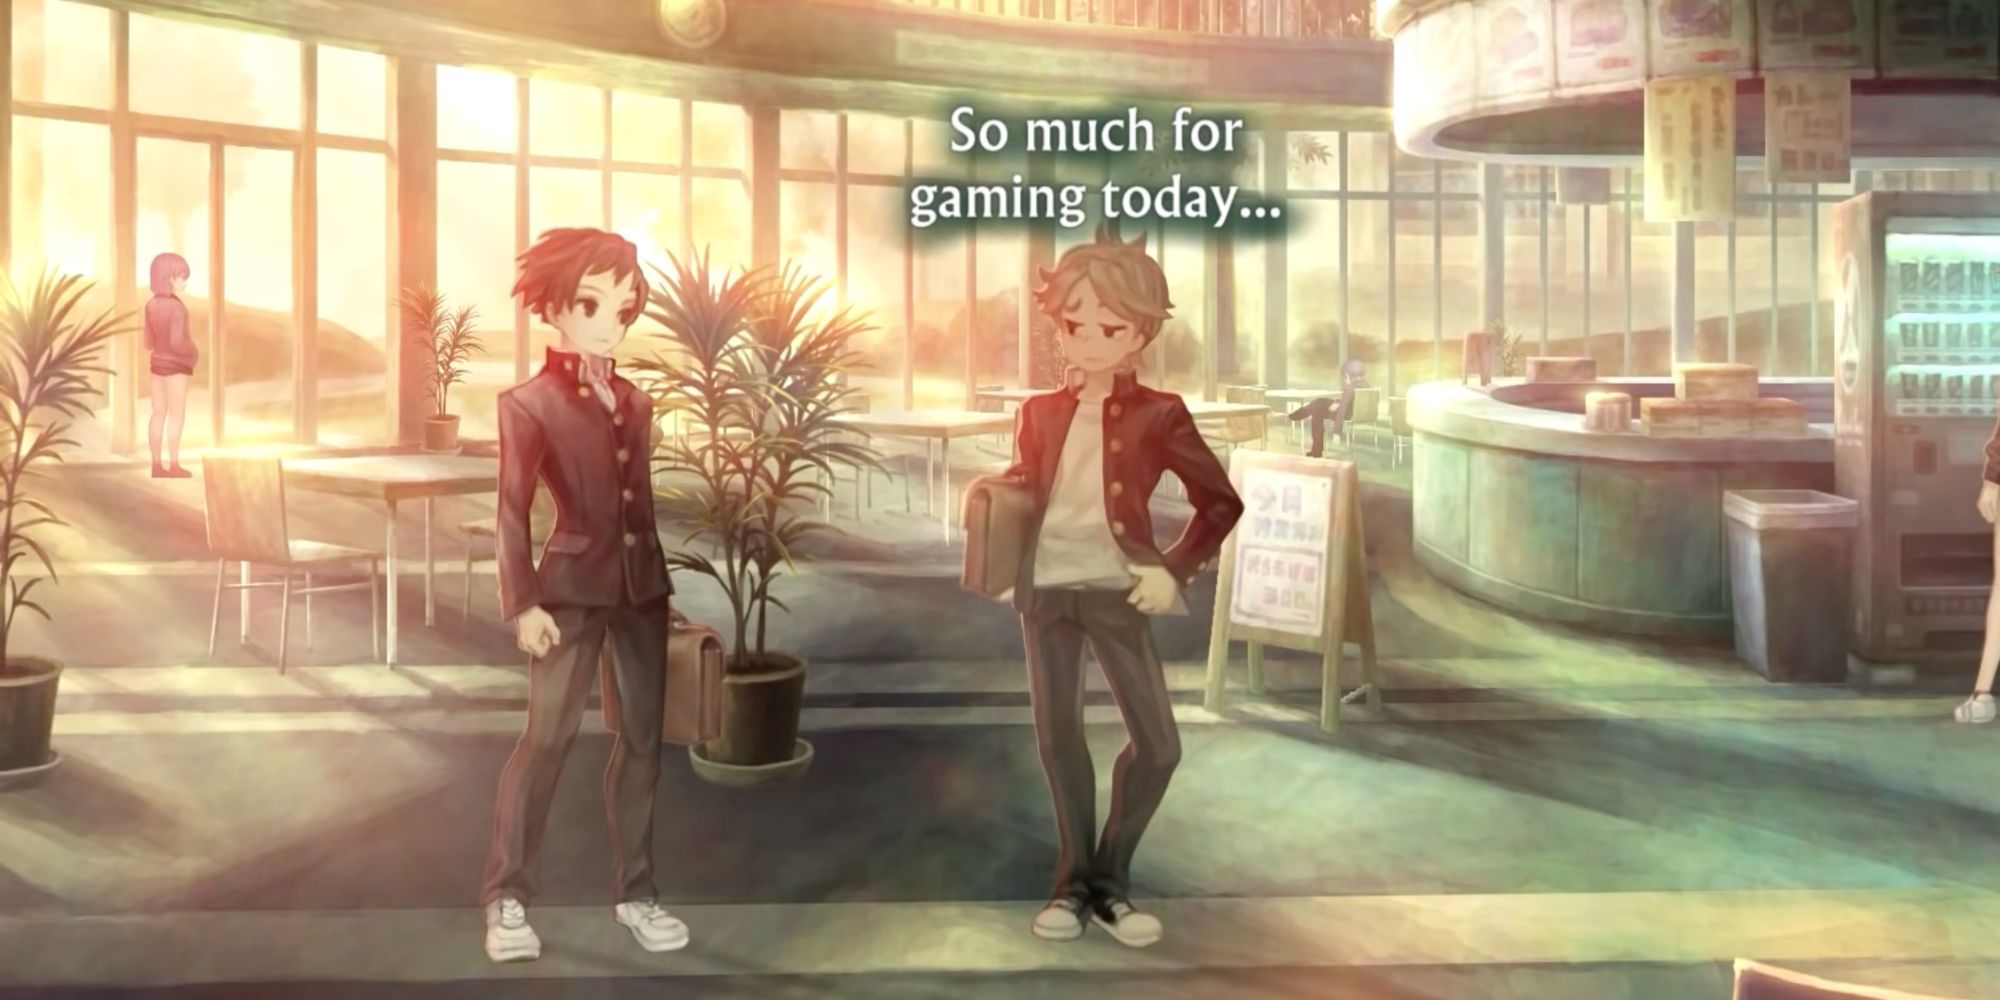 Shiba and Kurabe give up on playing video games after school in 13 Sentinels: Aegis Rim